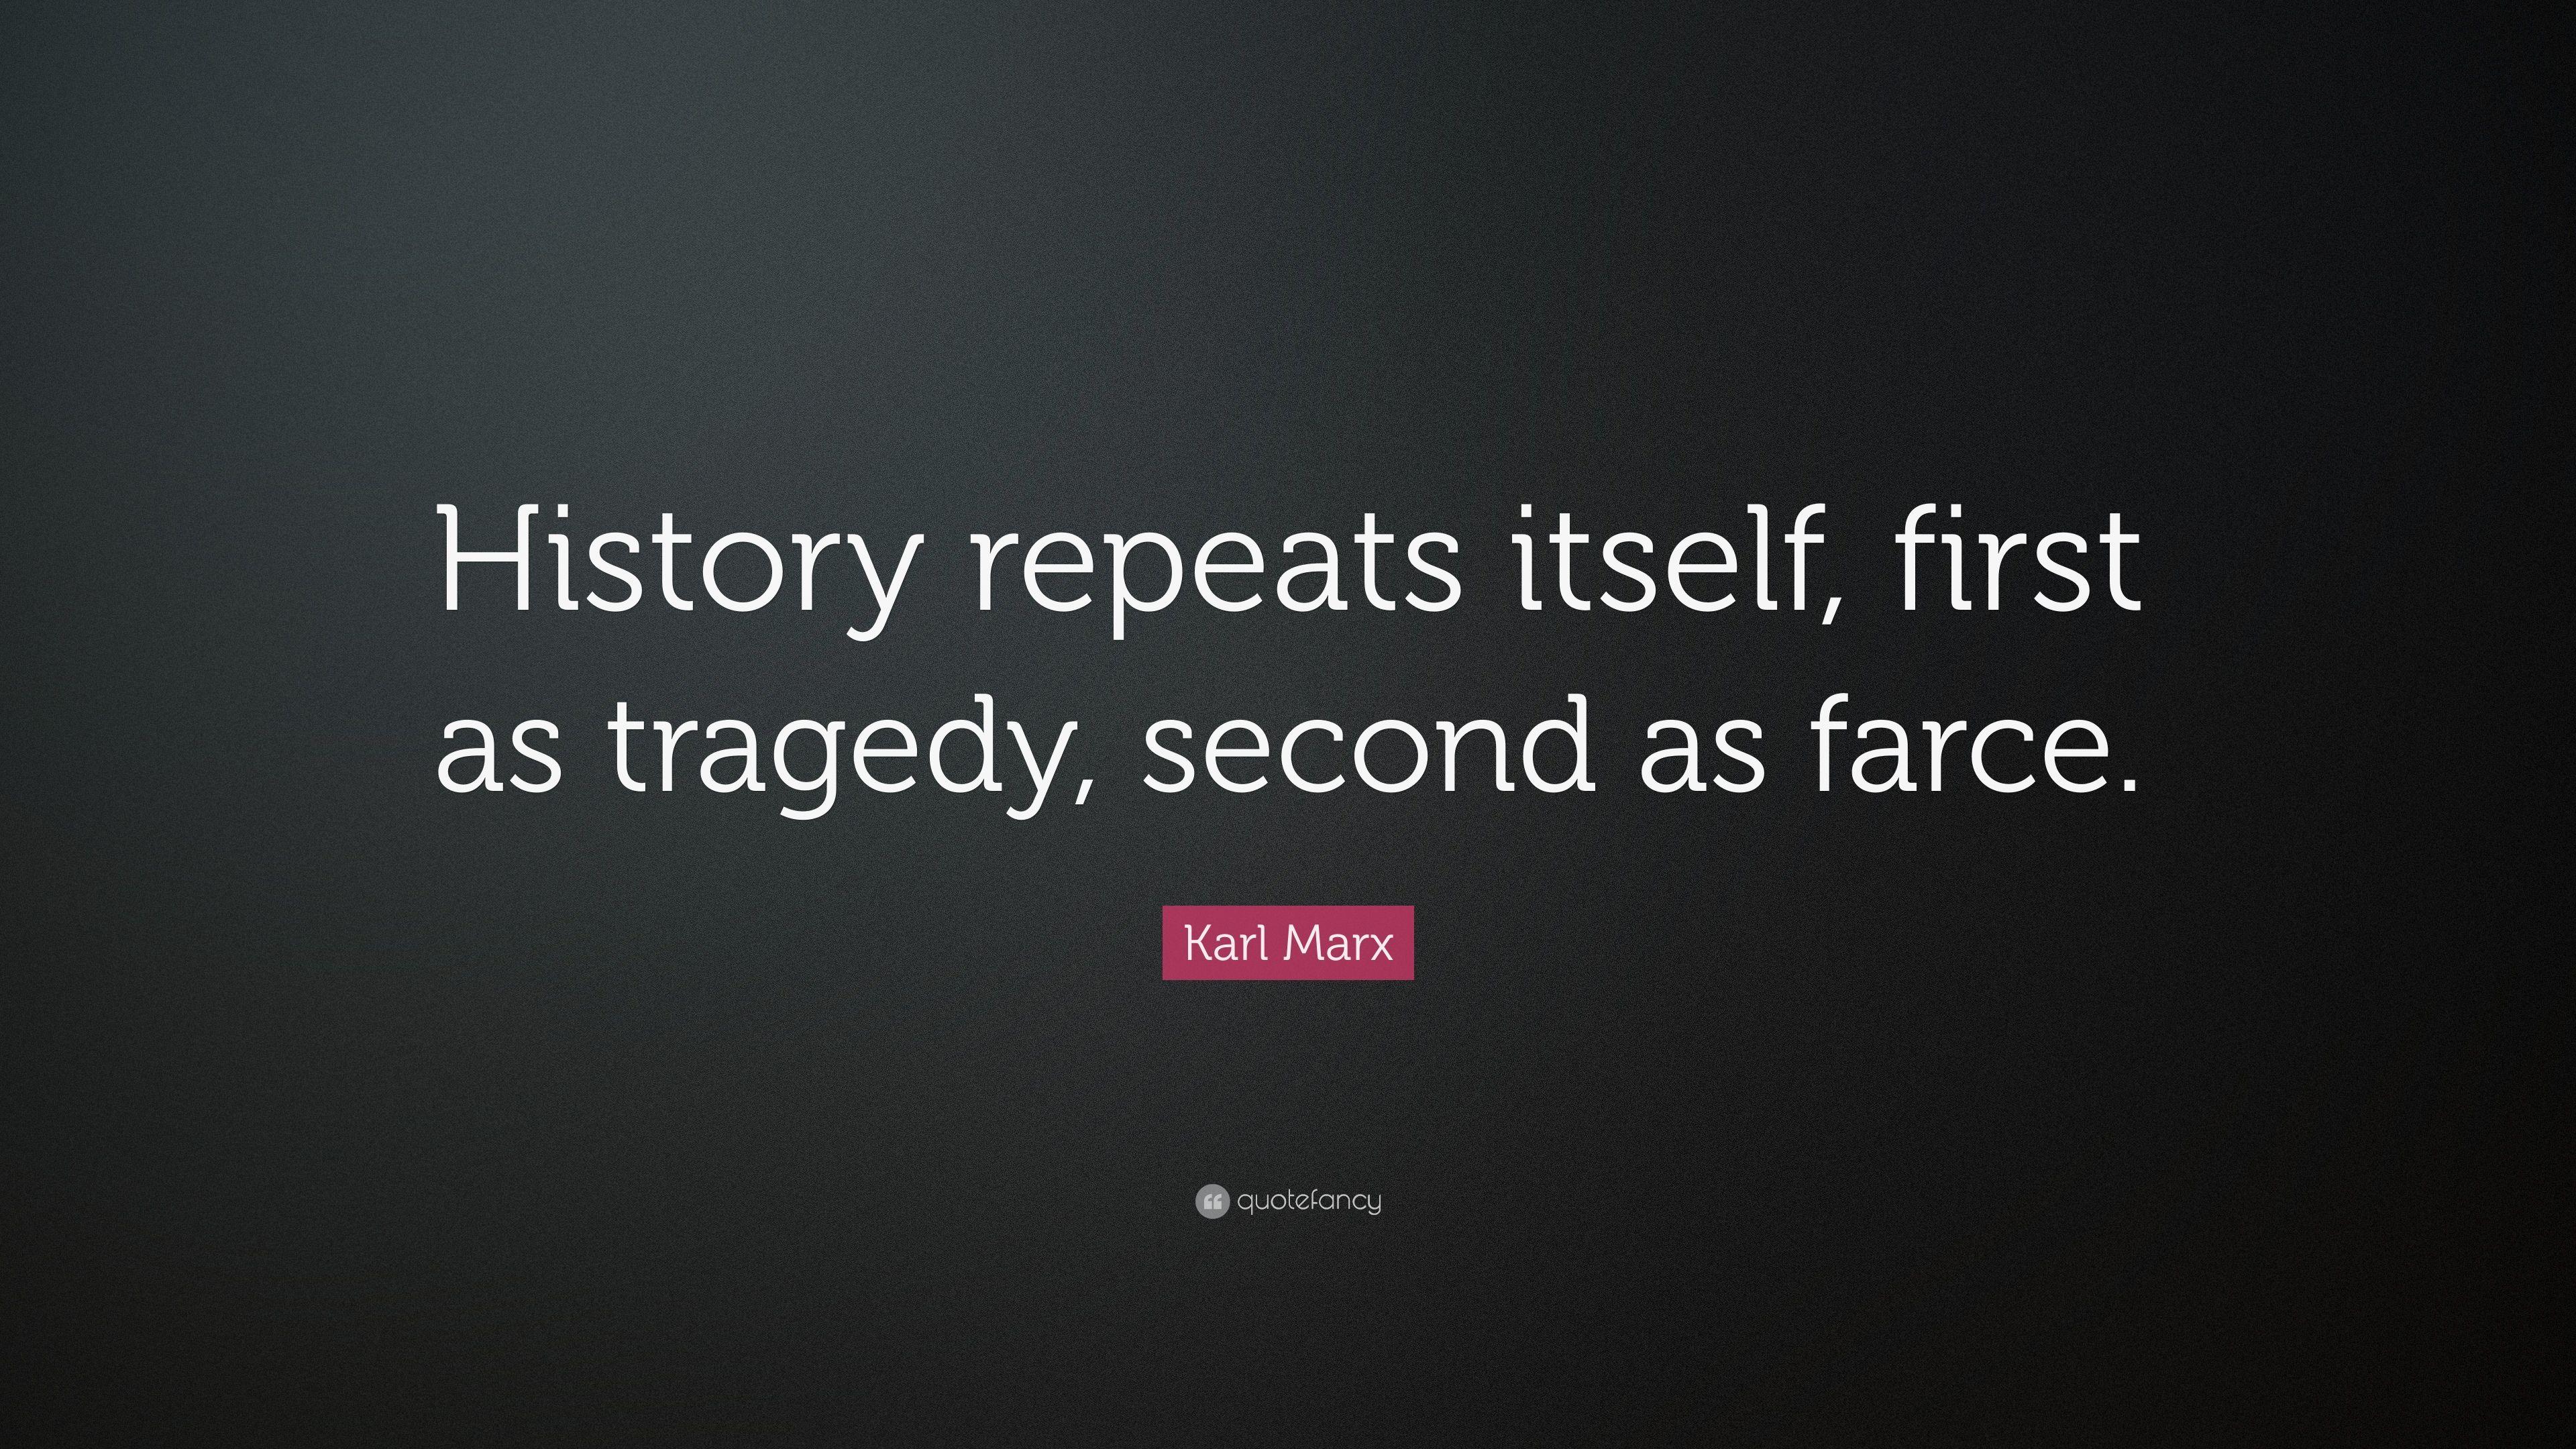 Karl Marx Quote: “History repeats itself, first as tragedy, second